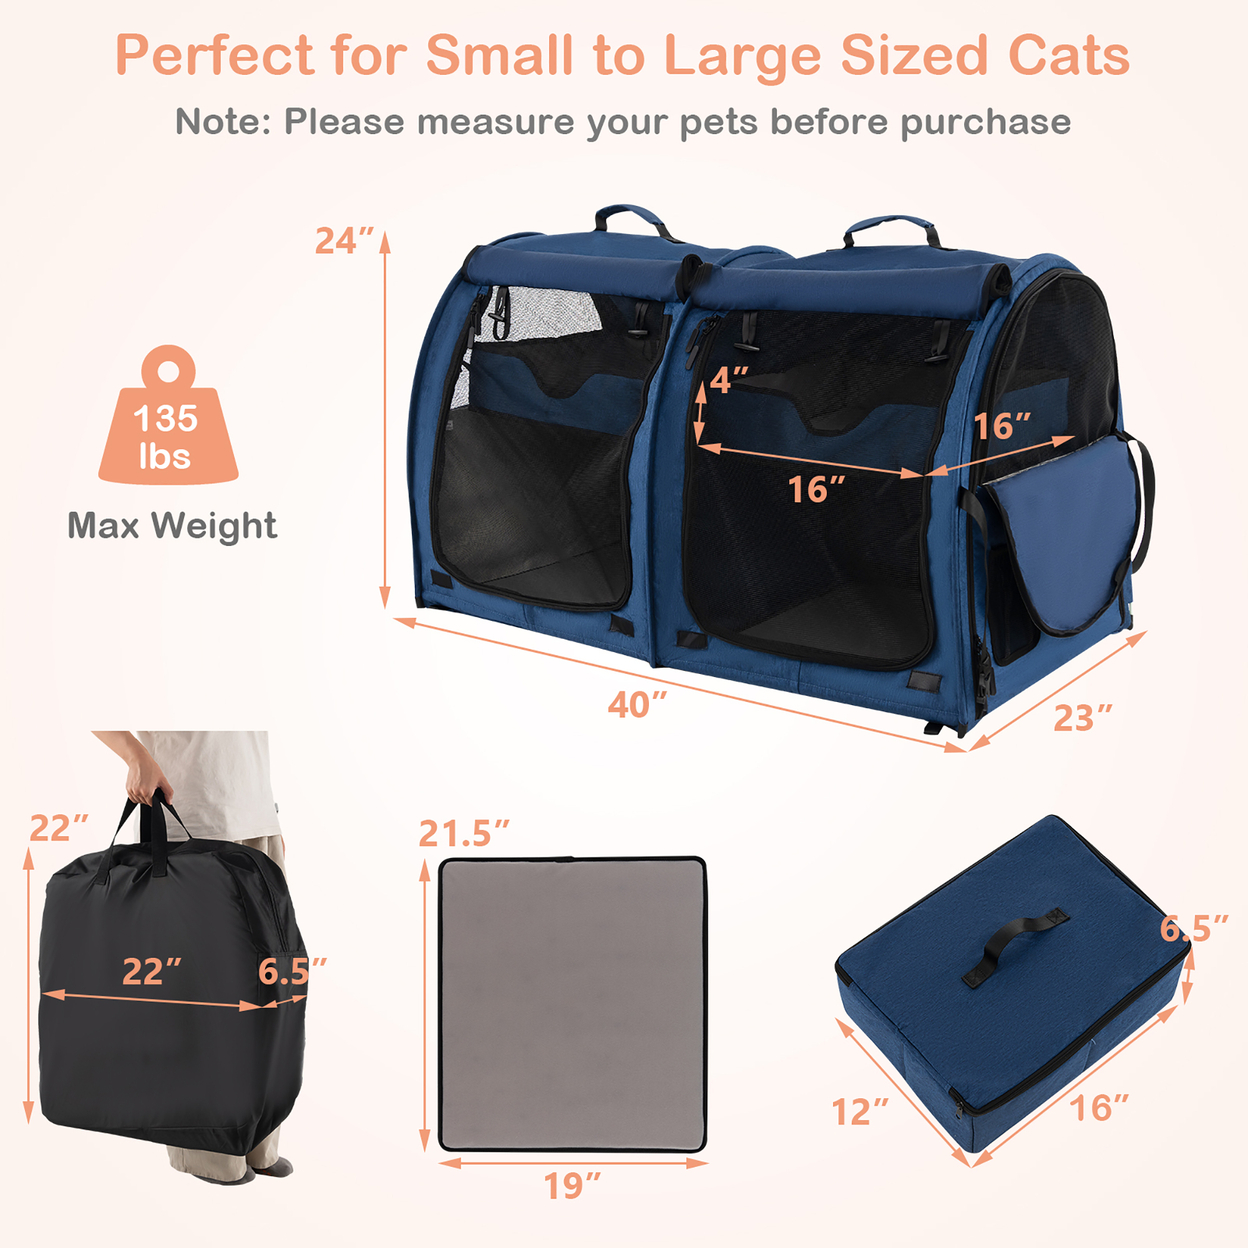 Portable Pet Carrier Kennel Cat Dog Crate Twin Compartments W/ Mats Litter Box Navy Blue